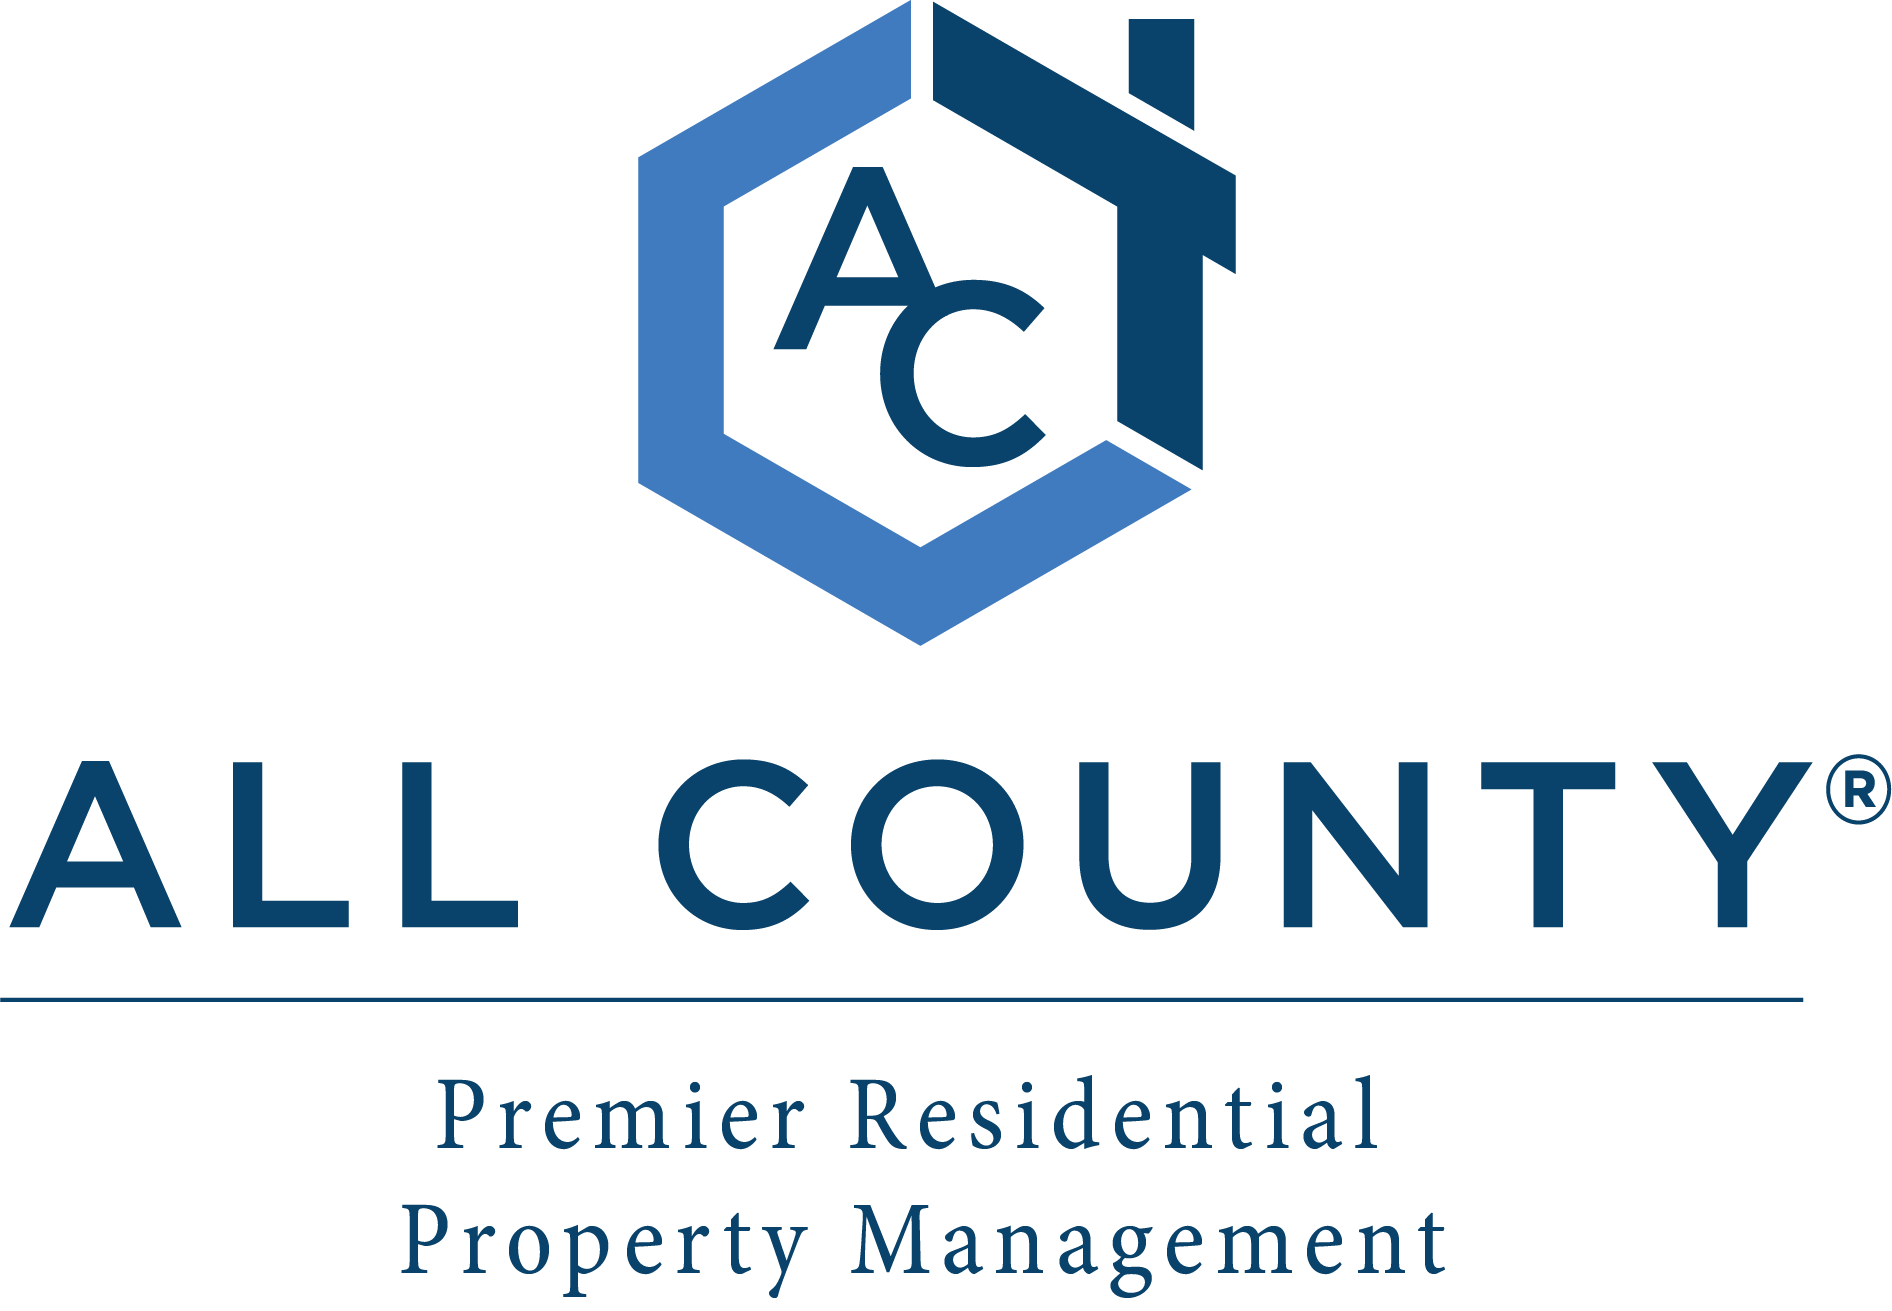 All County Premier Residential Property Management logo